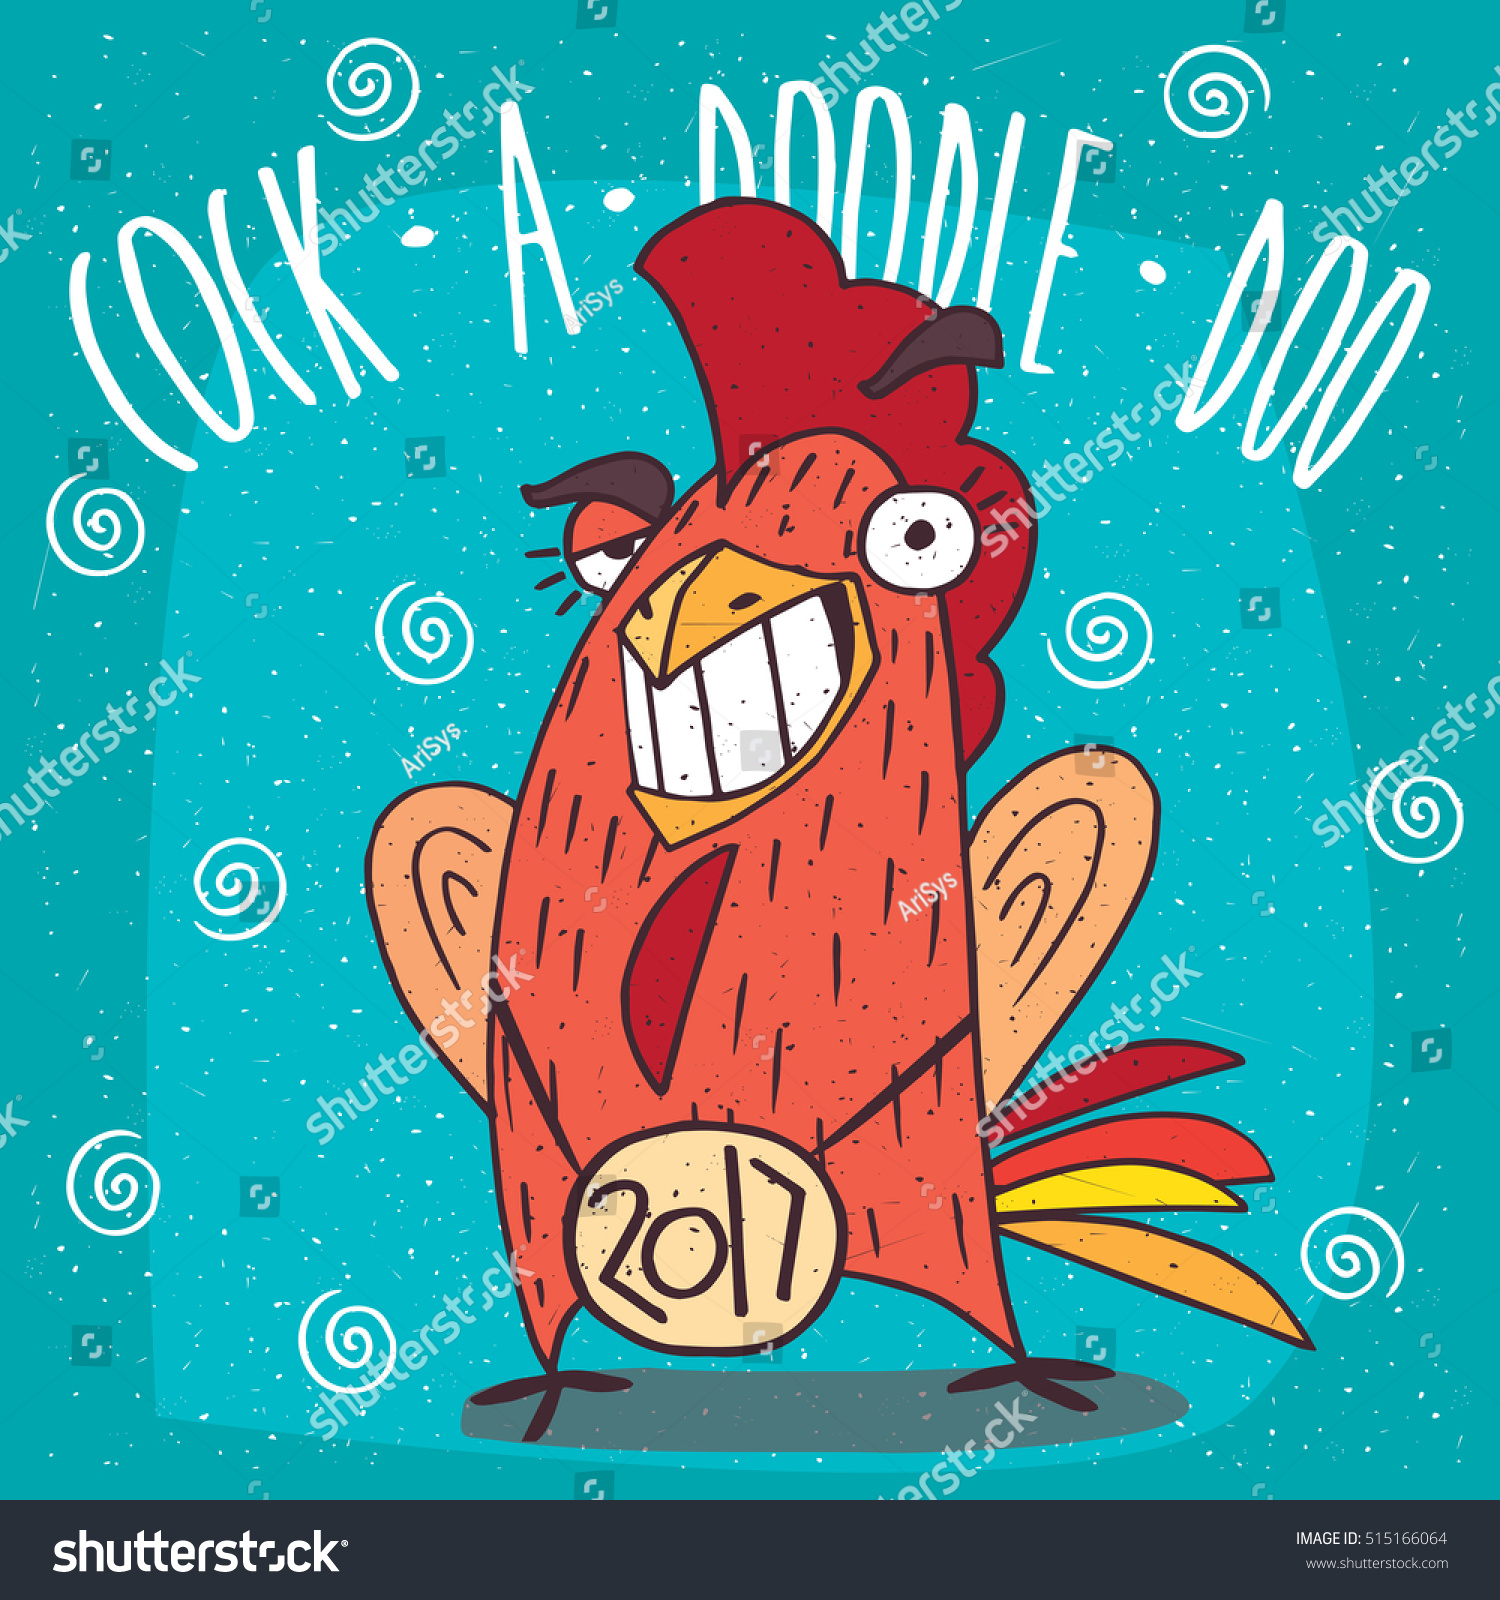 SVG of Cartoon smug cock or rooster with the logo 2017, smiling teeth and making eyes at. Blue background and Cock a doodle doo lettering. Vector illustration svg